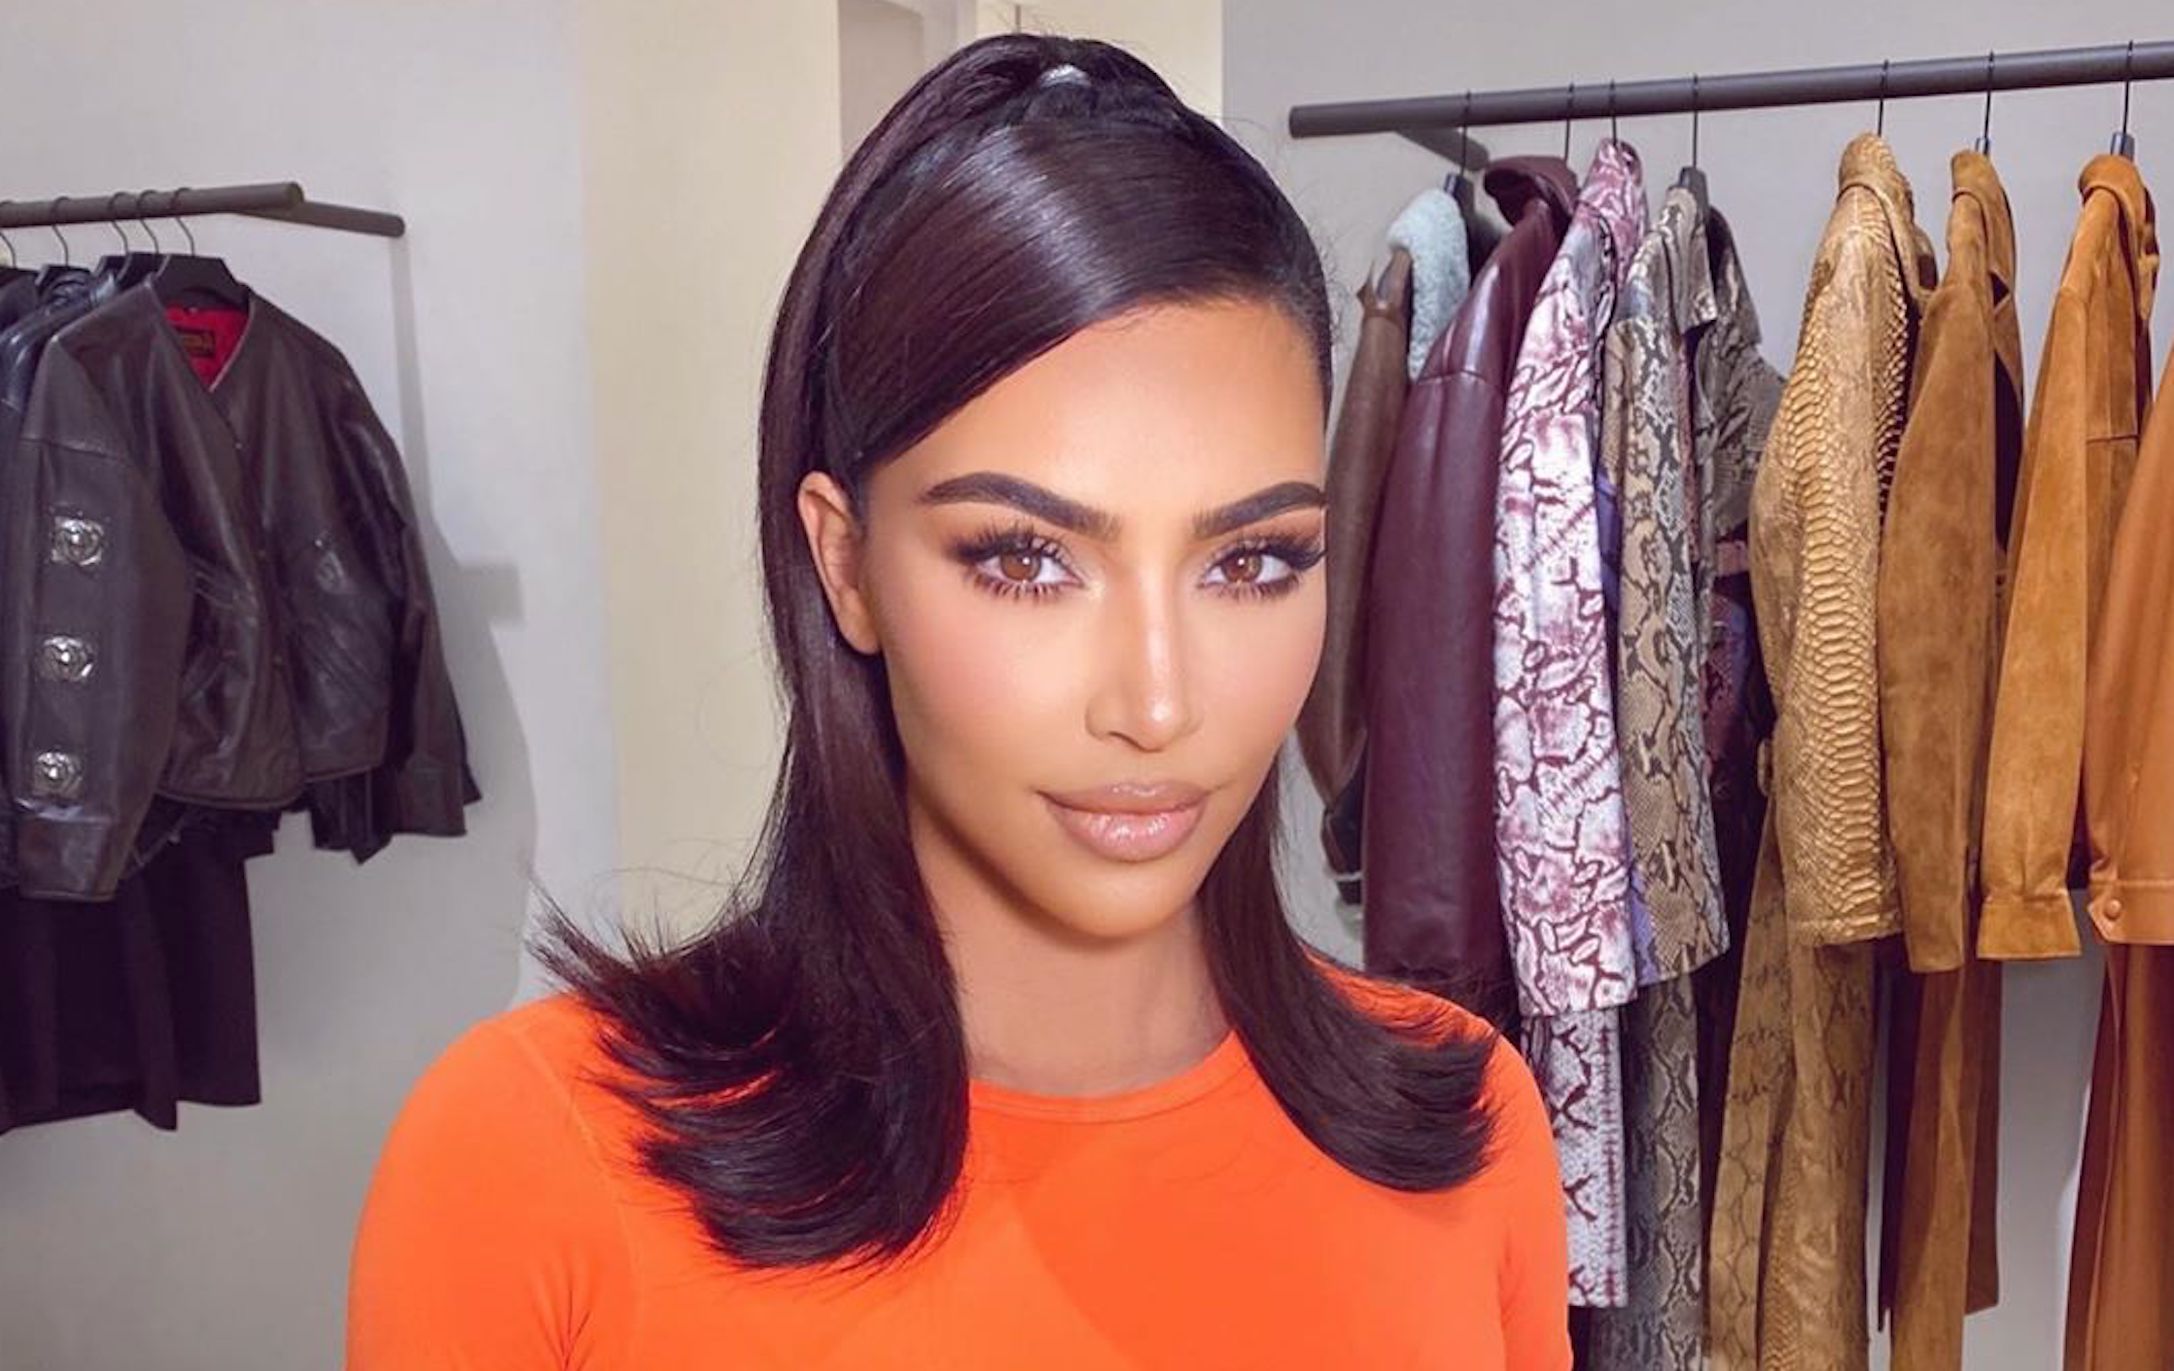 Kim Kardashian is criticized after introducing a Skims maternity line